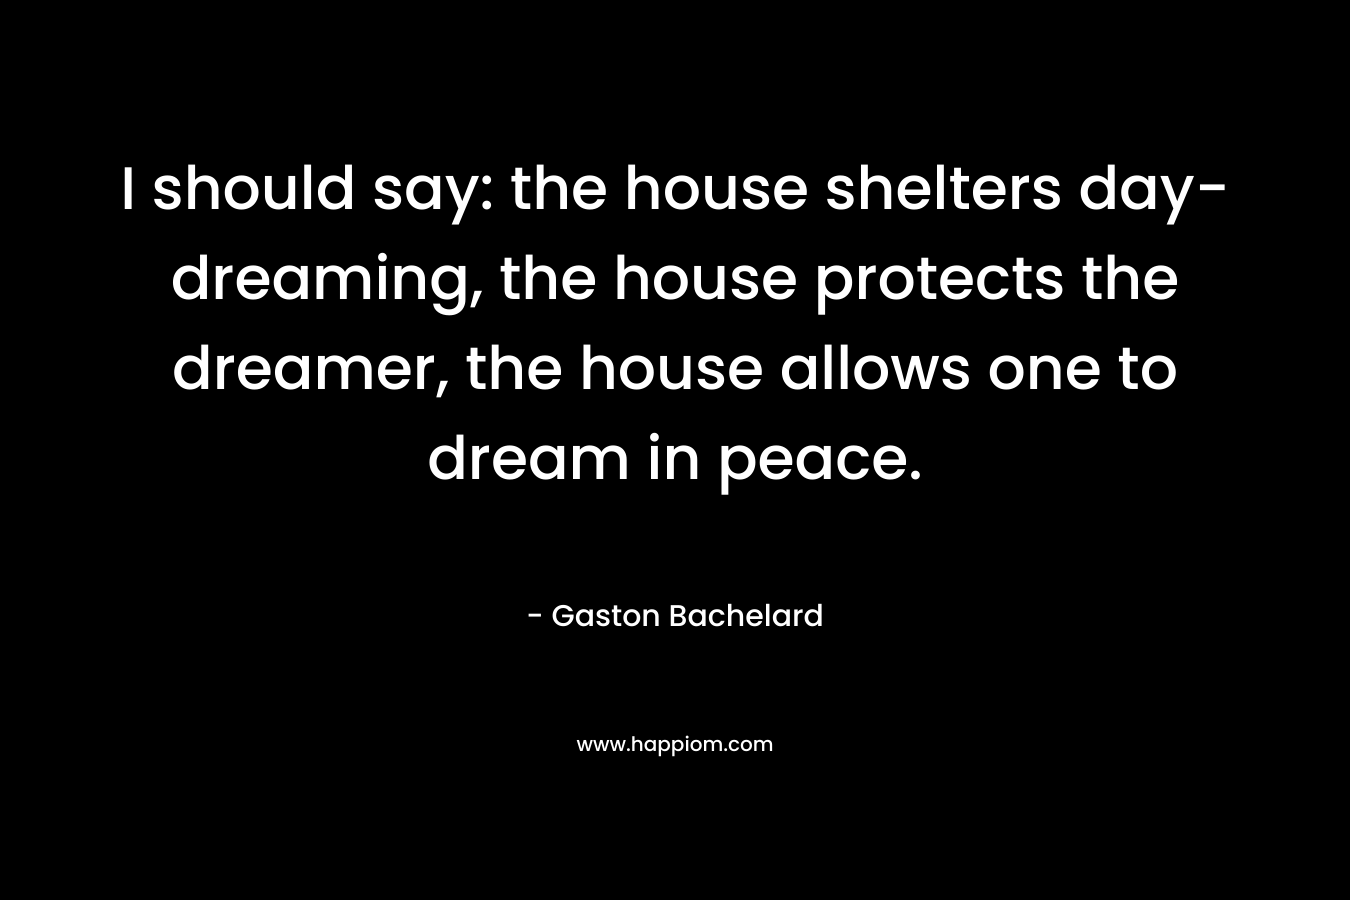 I should say: the house shelters day-dreaming, the house protects the dreamer, the house allows one to dream in peace.